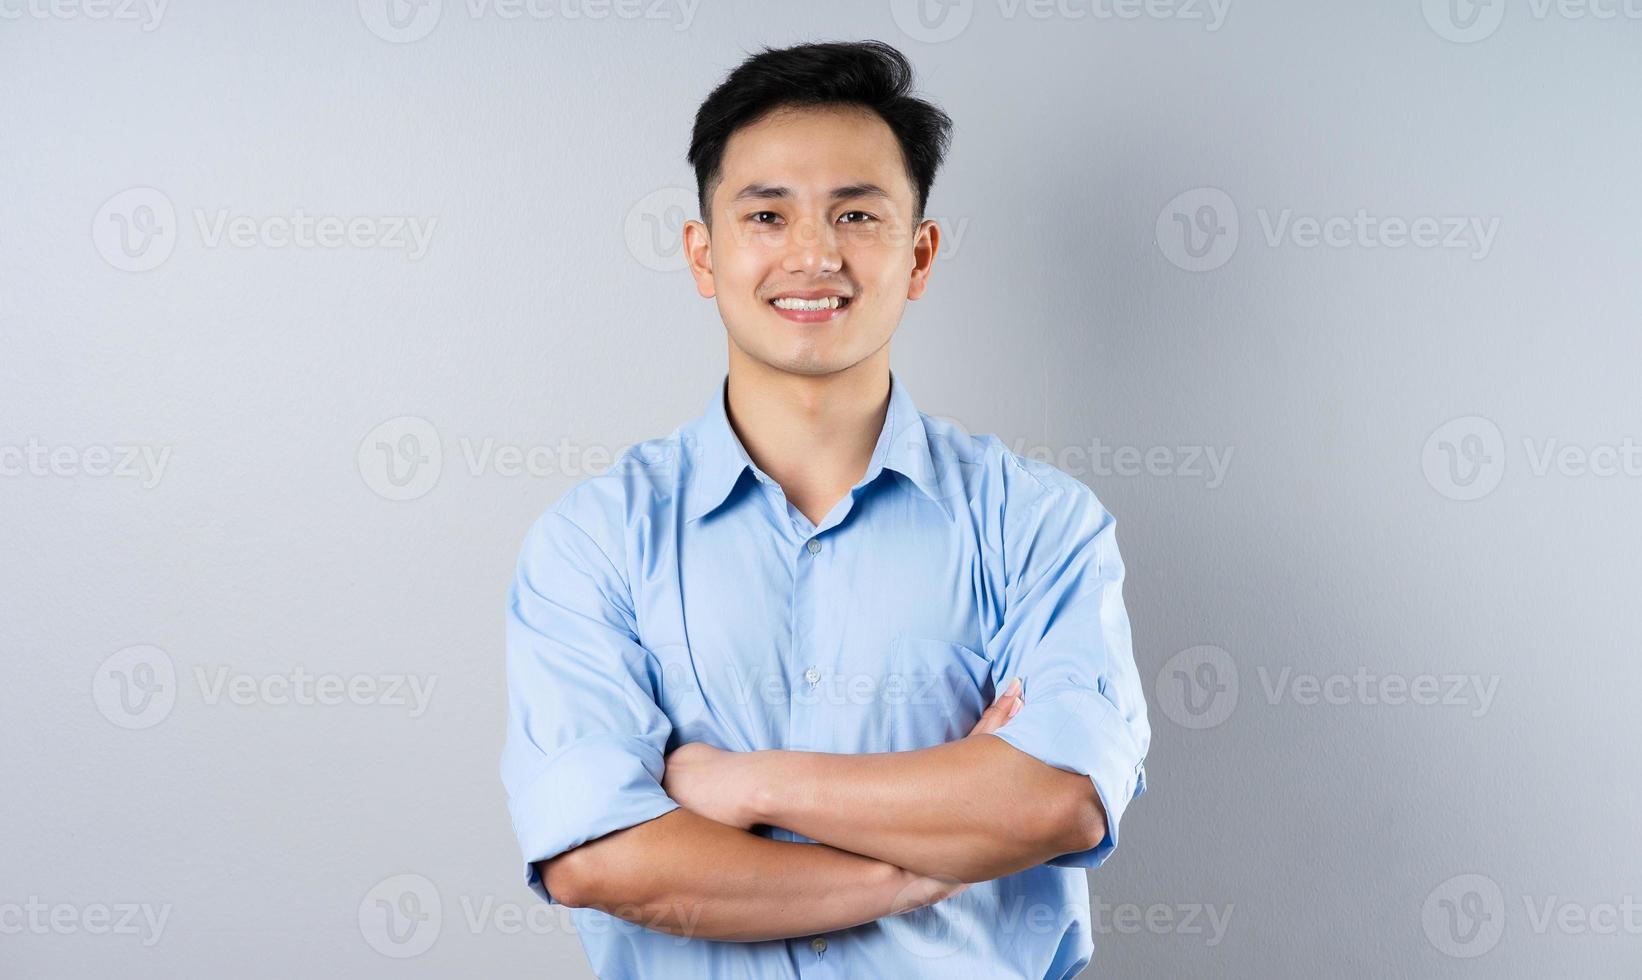 image of young businessman male on gray background photo